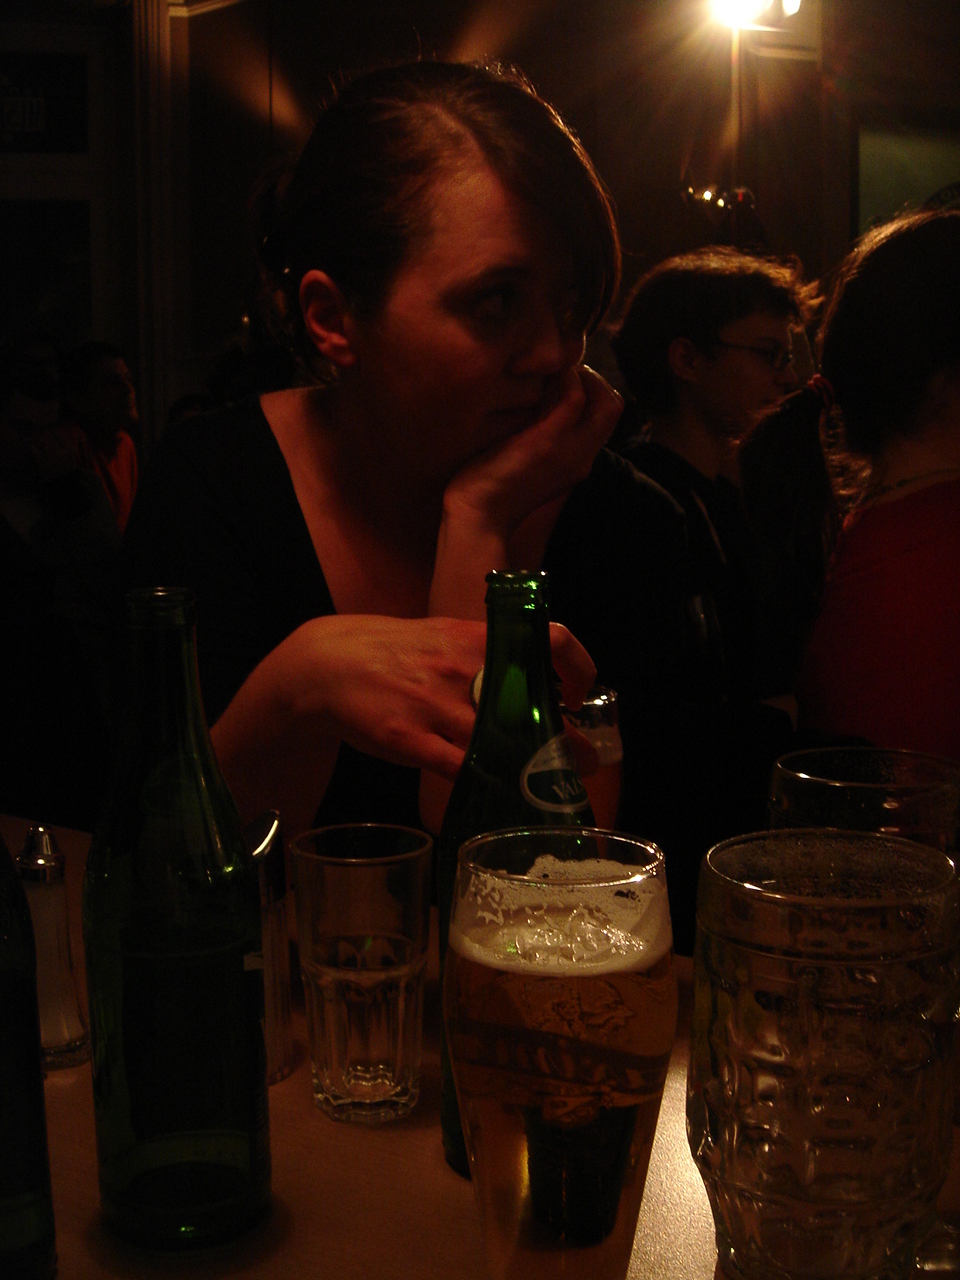 a girl is sitting at a table with two glasses and a beer bottle